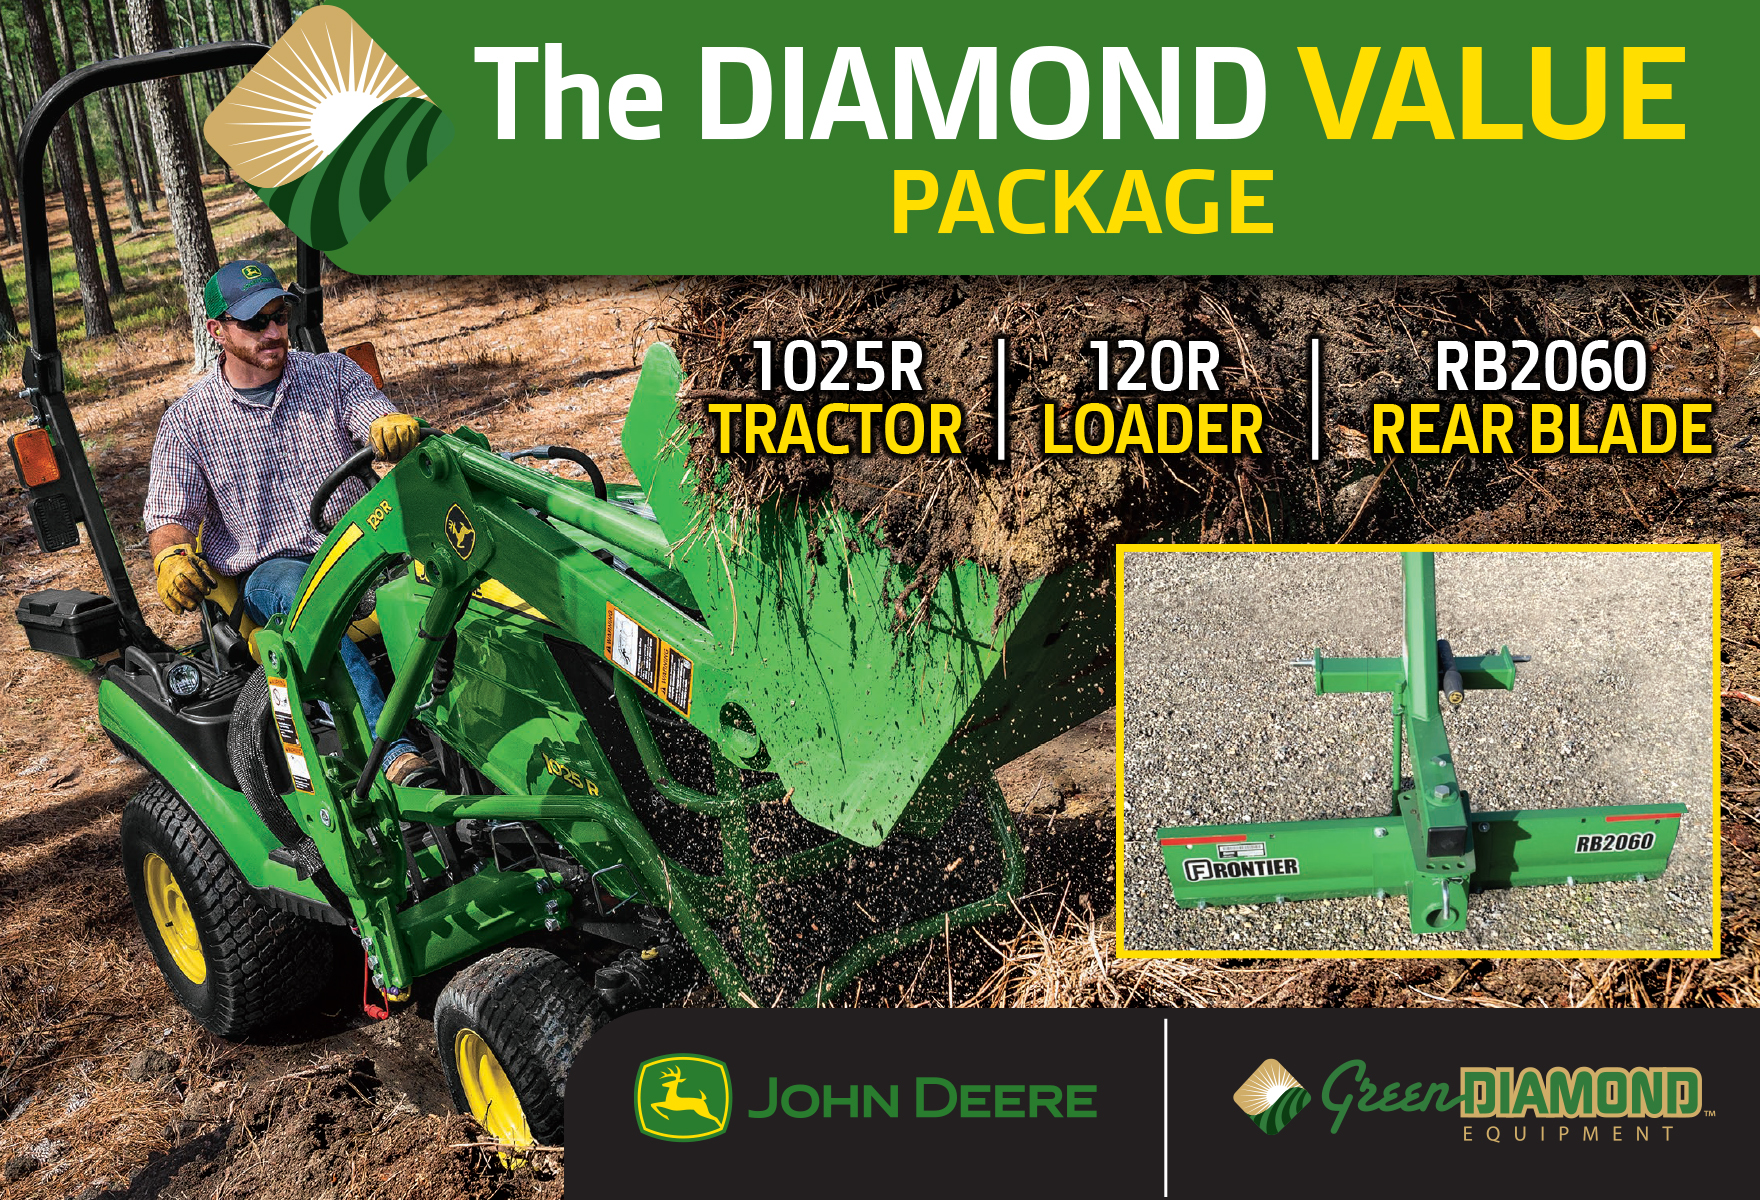 The Diamond Value Package